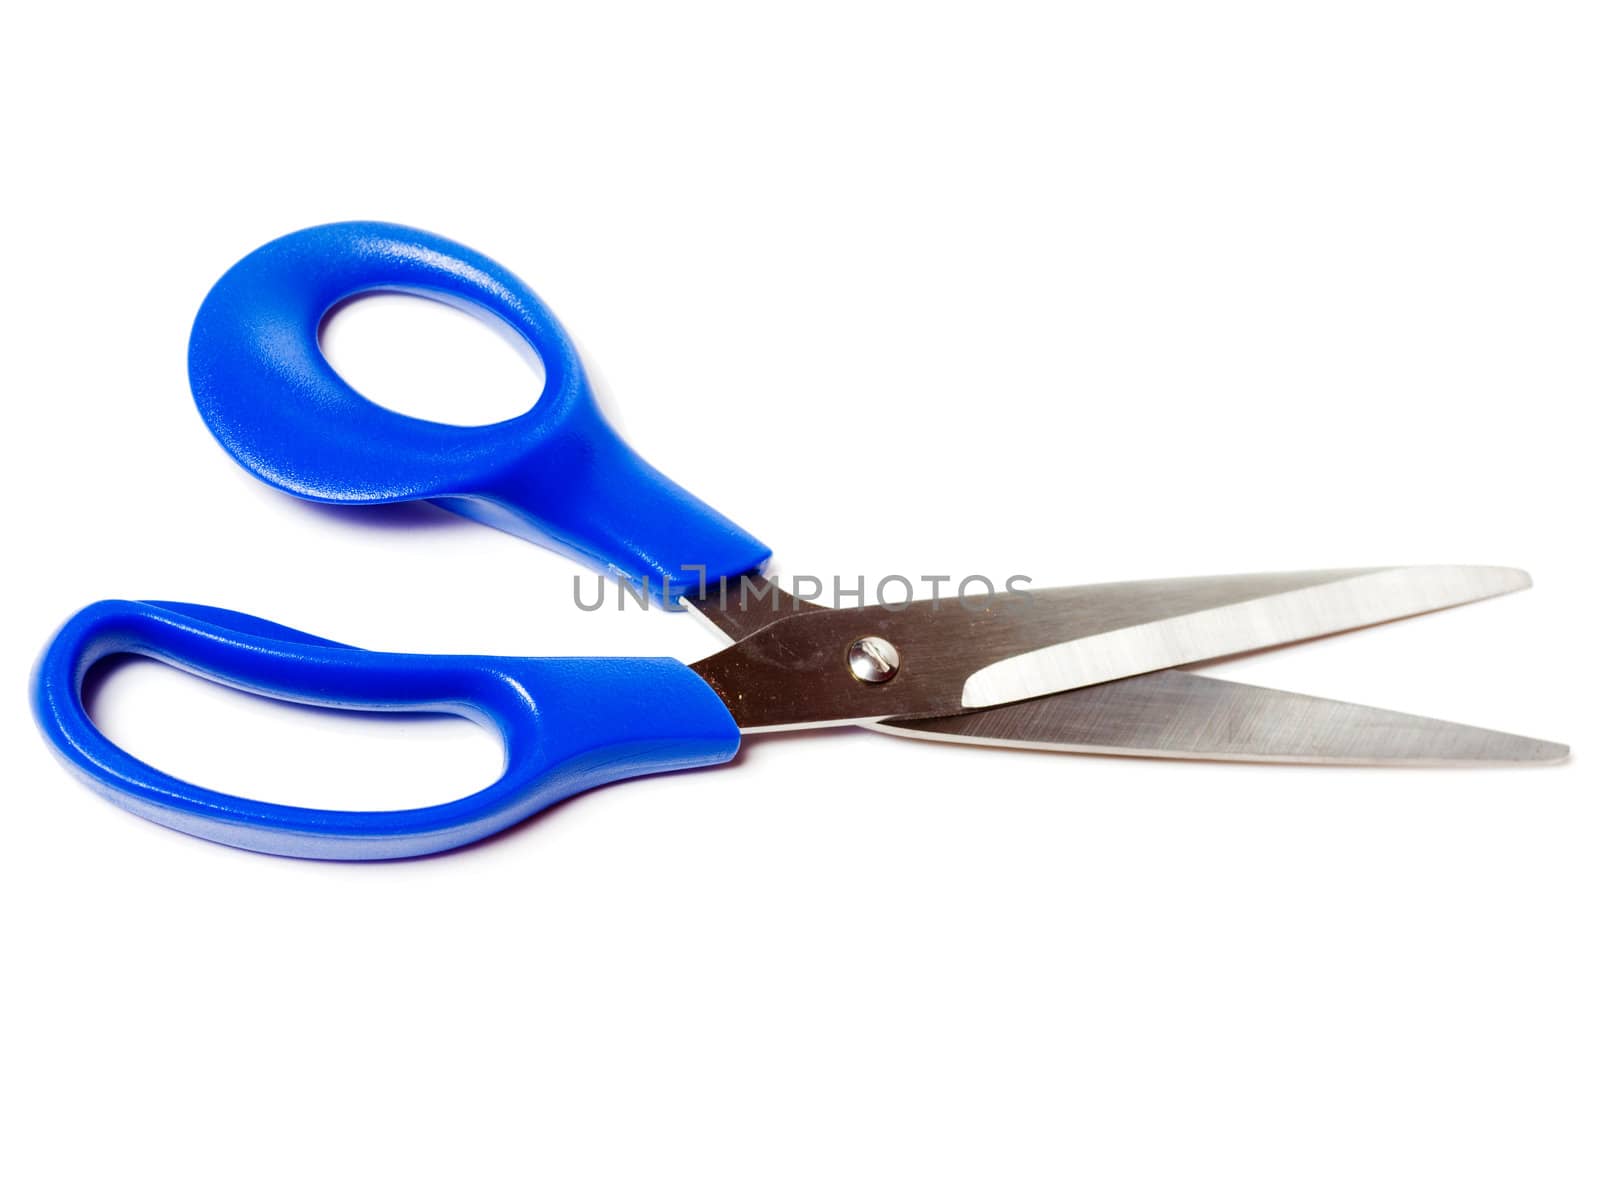 New scissors with blue handle isolated on white